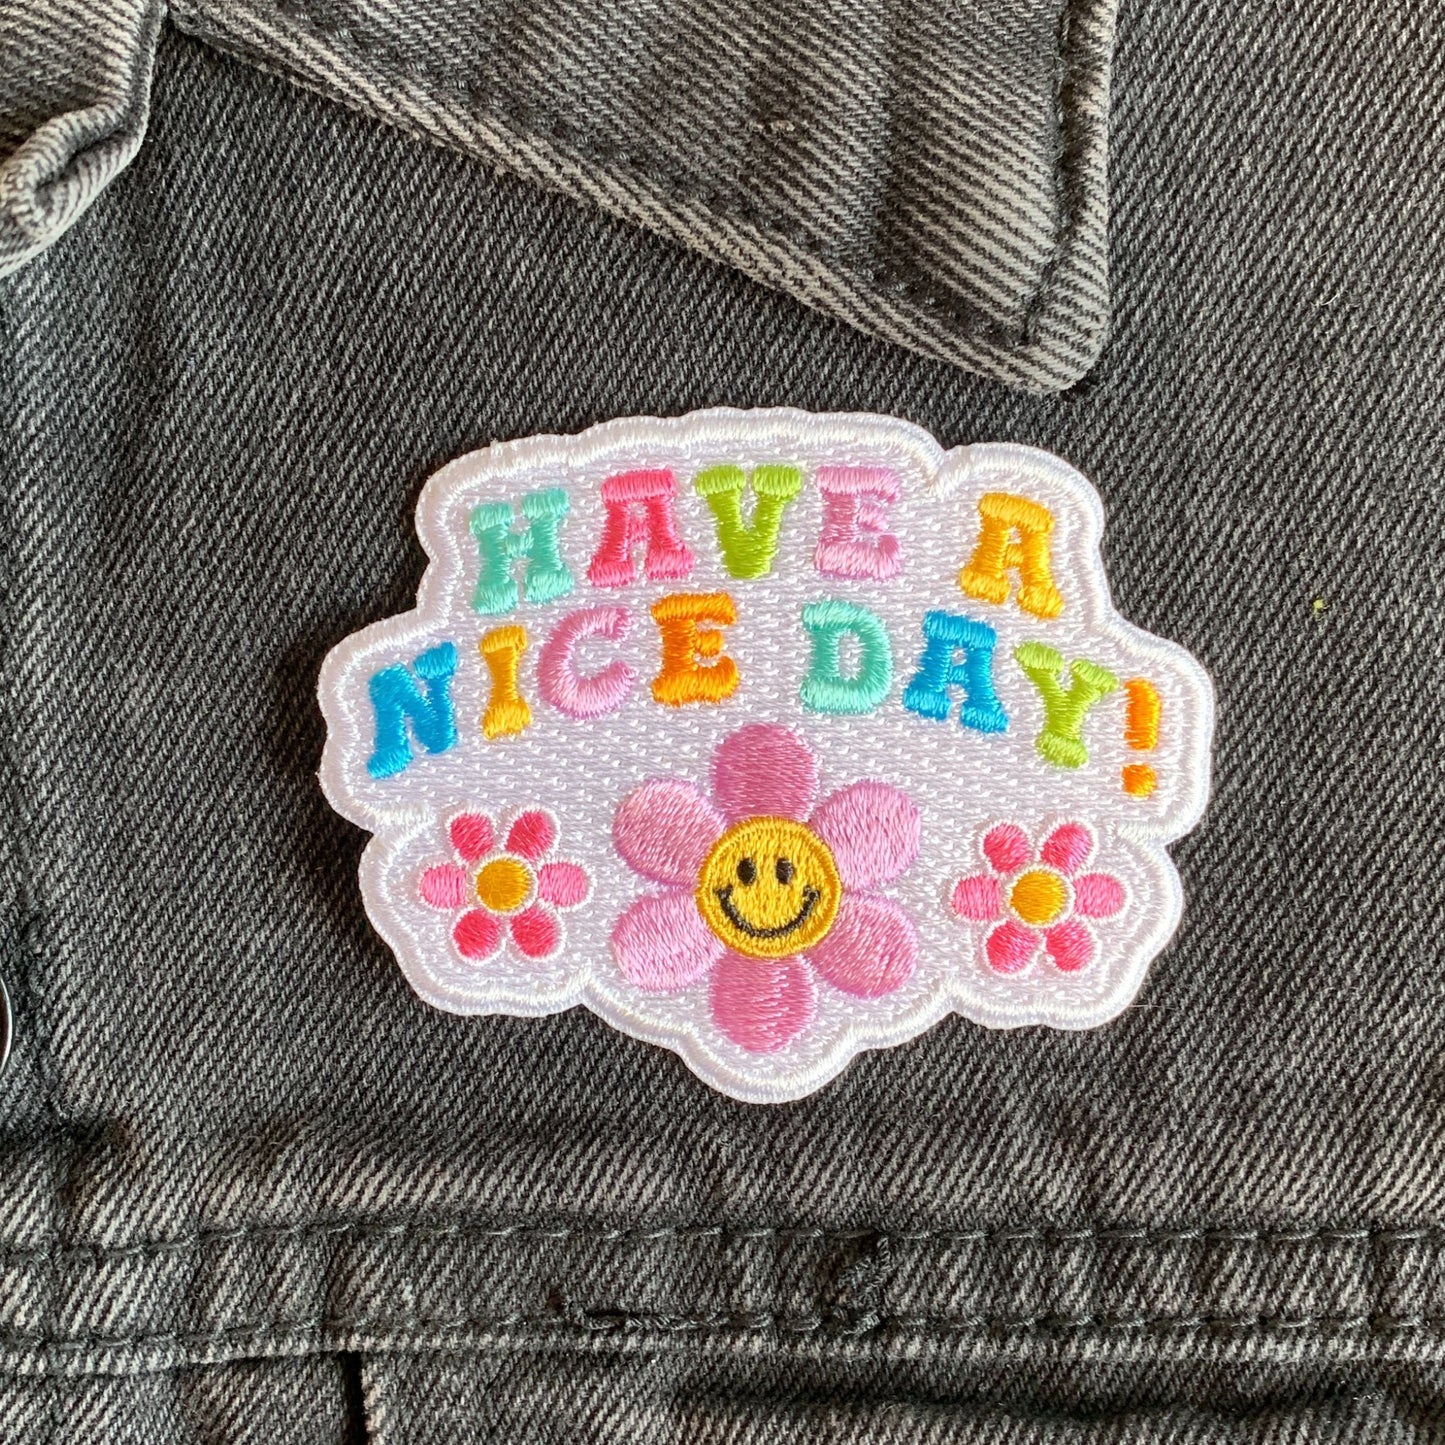 Have a Nice Day Positivity Quote Iron On Patches | Embroidered Applique